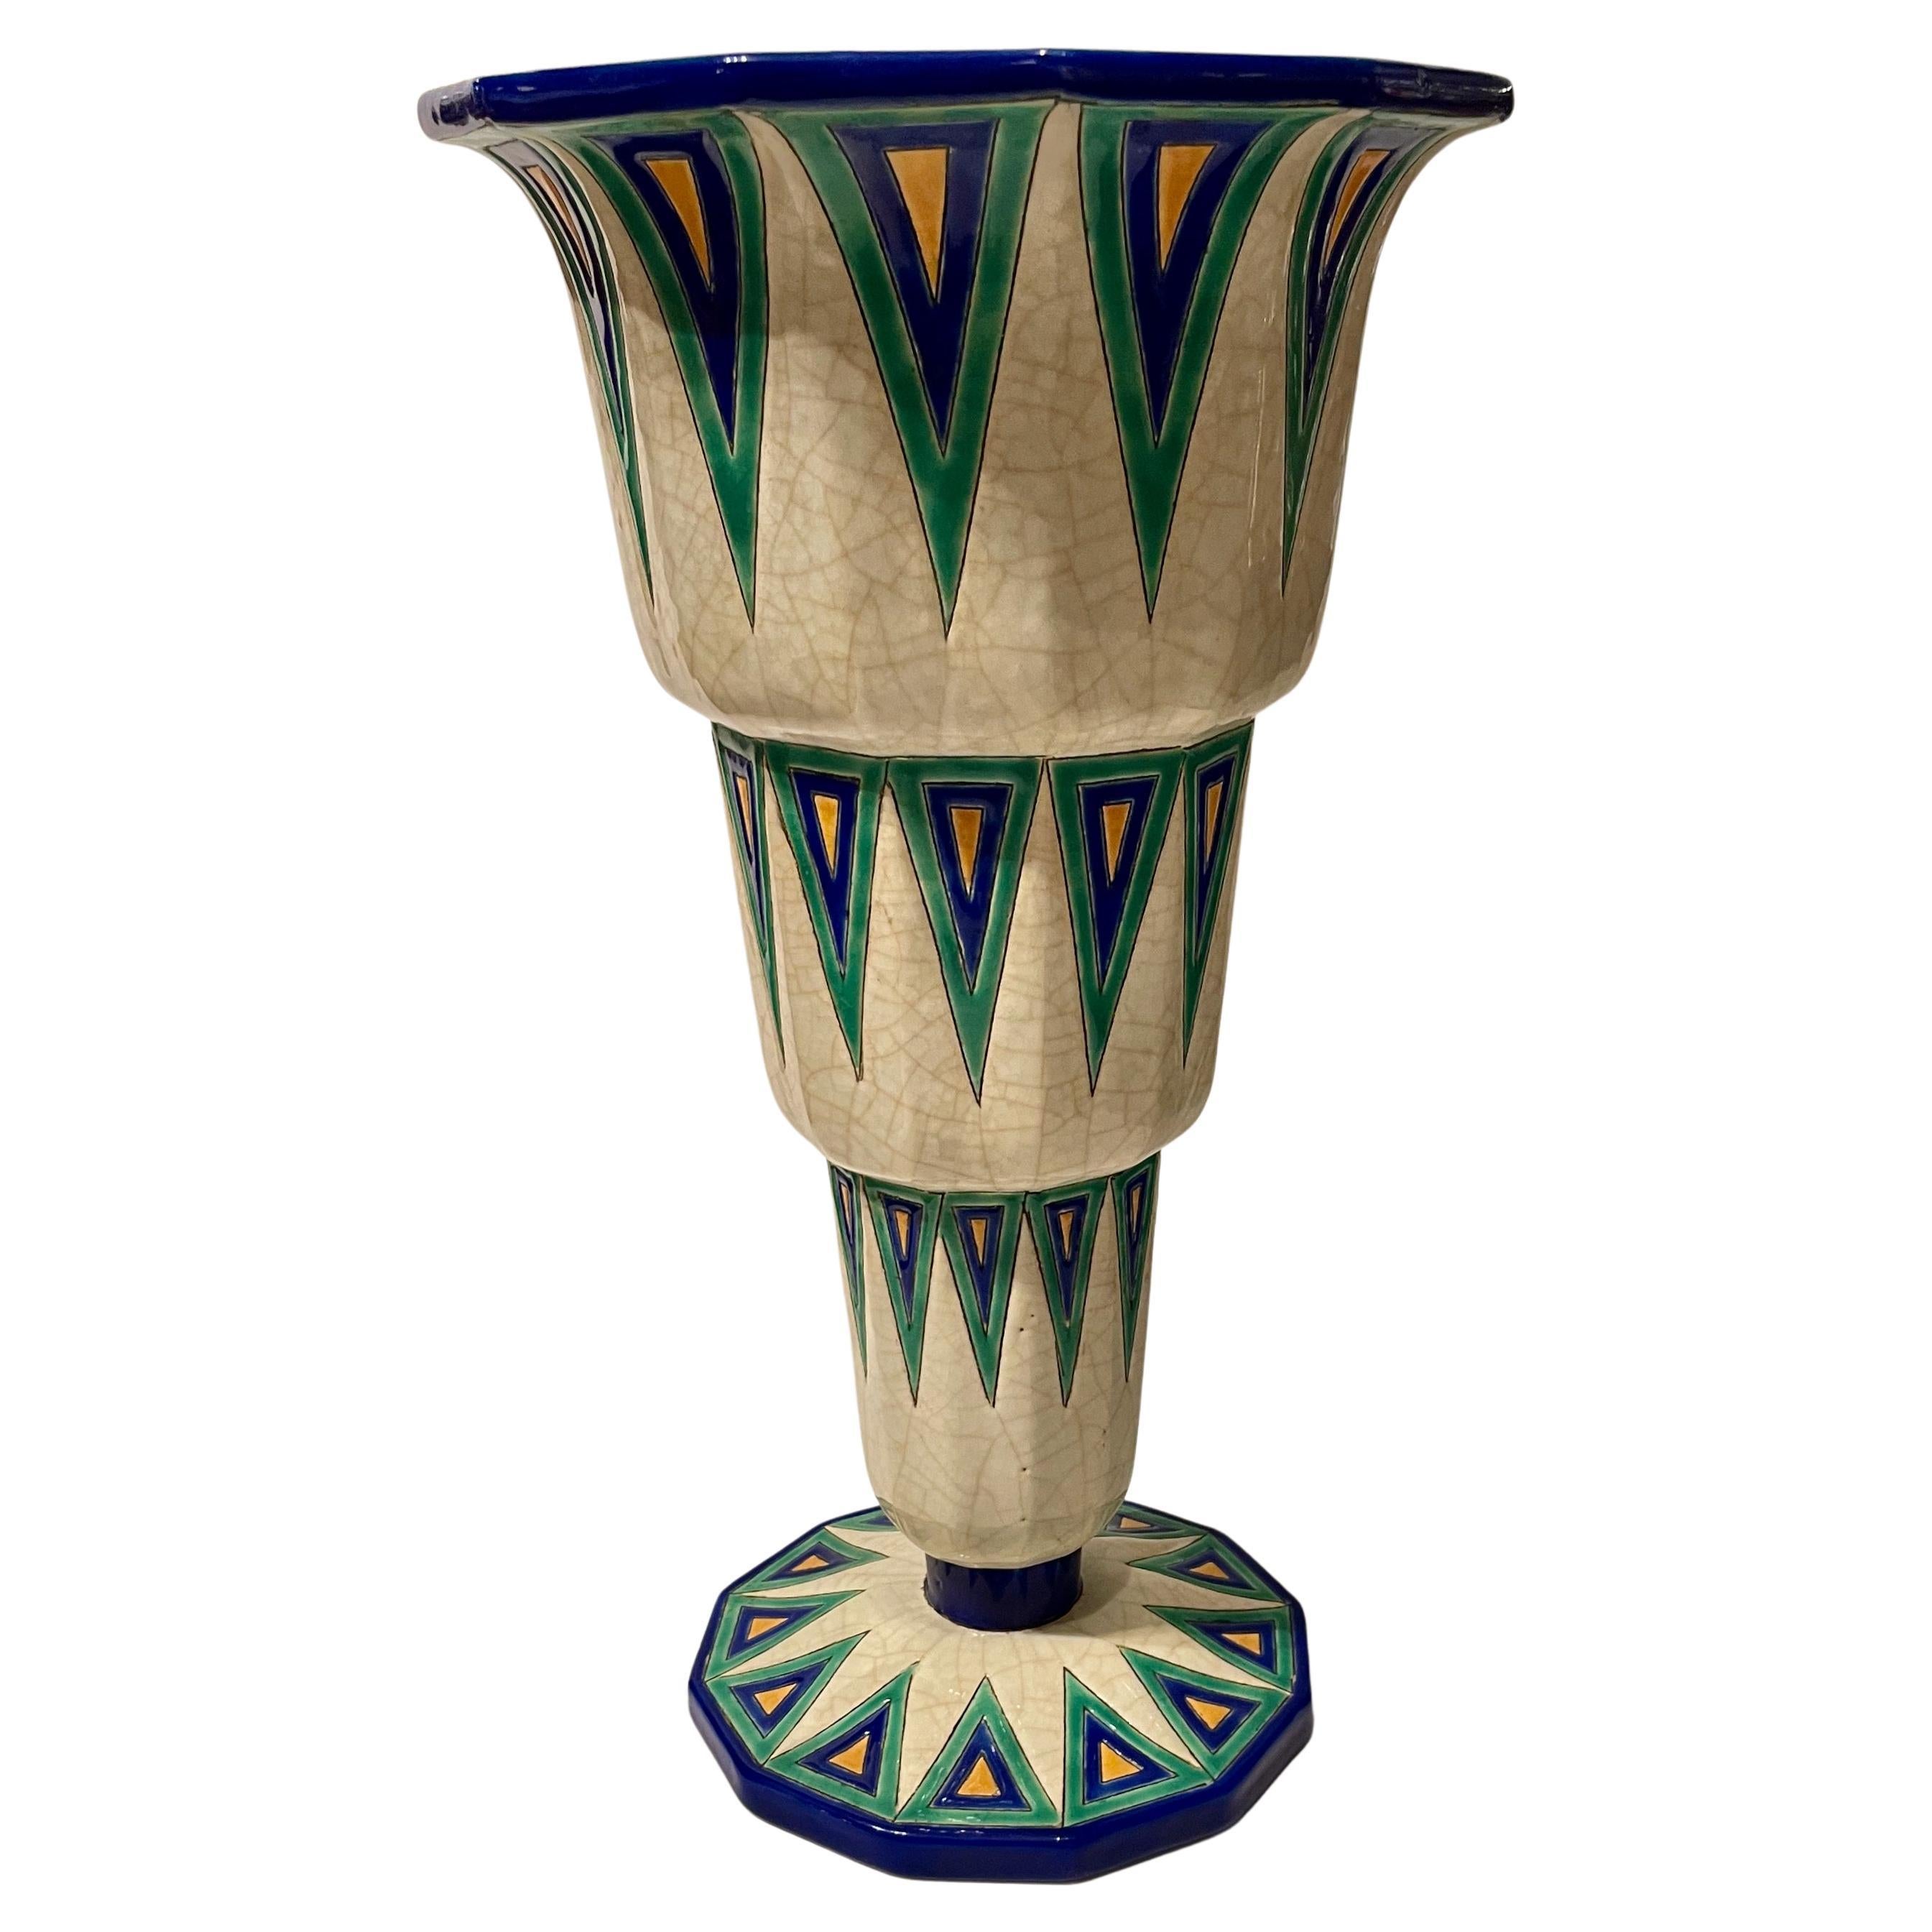 Longwy Art Deco French Cloisonné Ceramic Vase with Triangles Grand Size For Sale